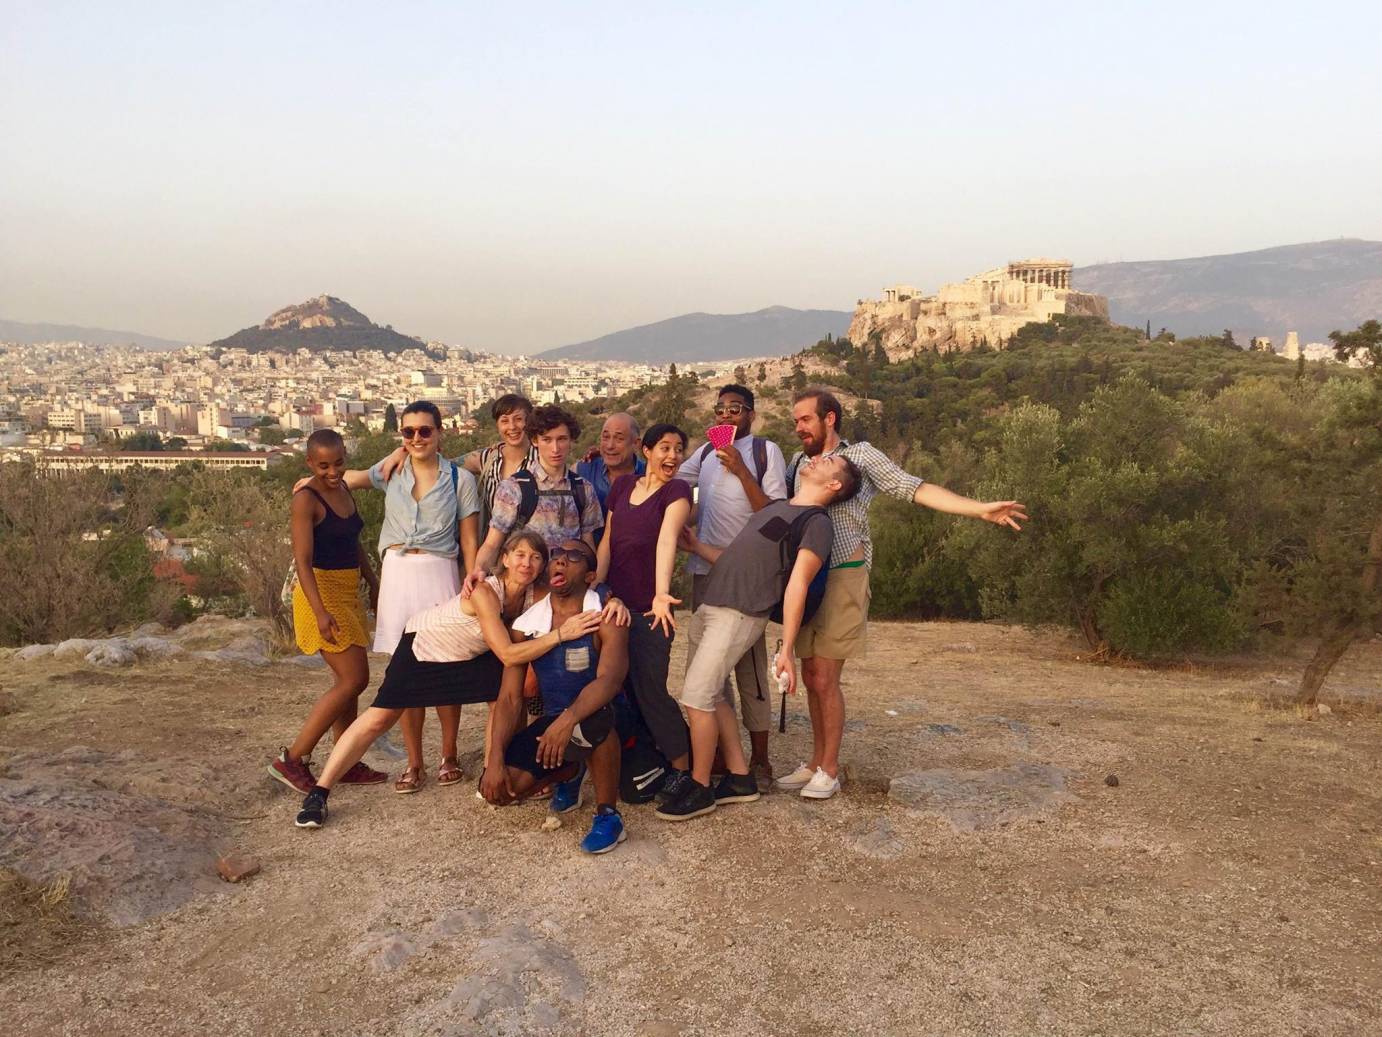 Company members strike silly faces for a photo overlooking the city of Athens